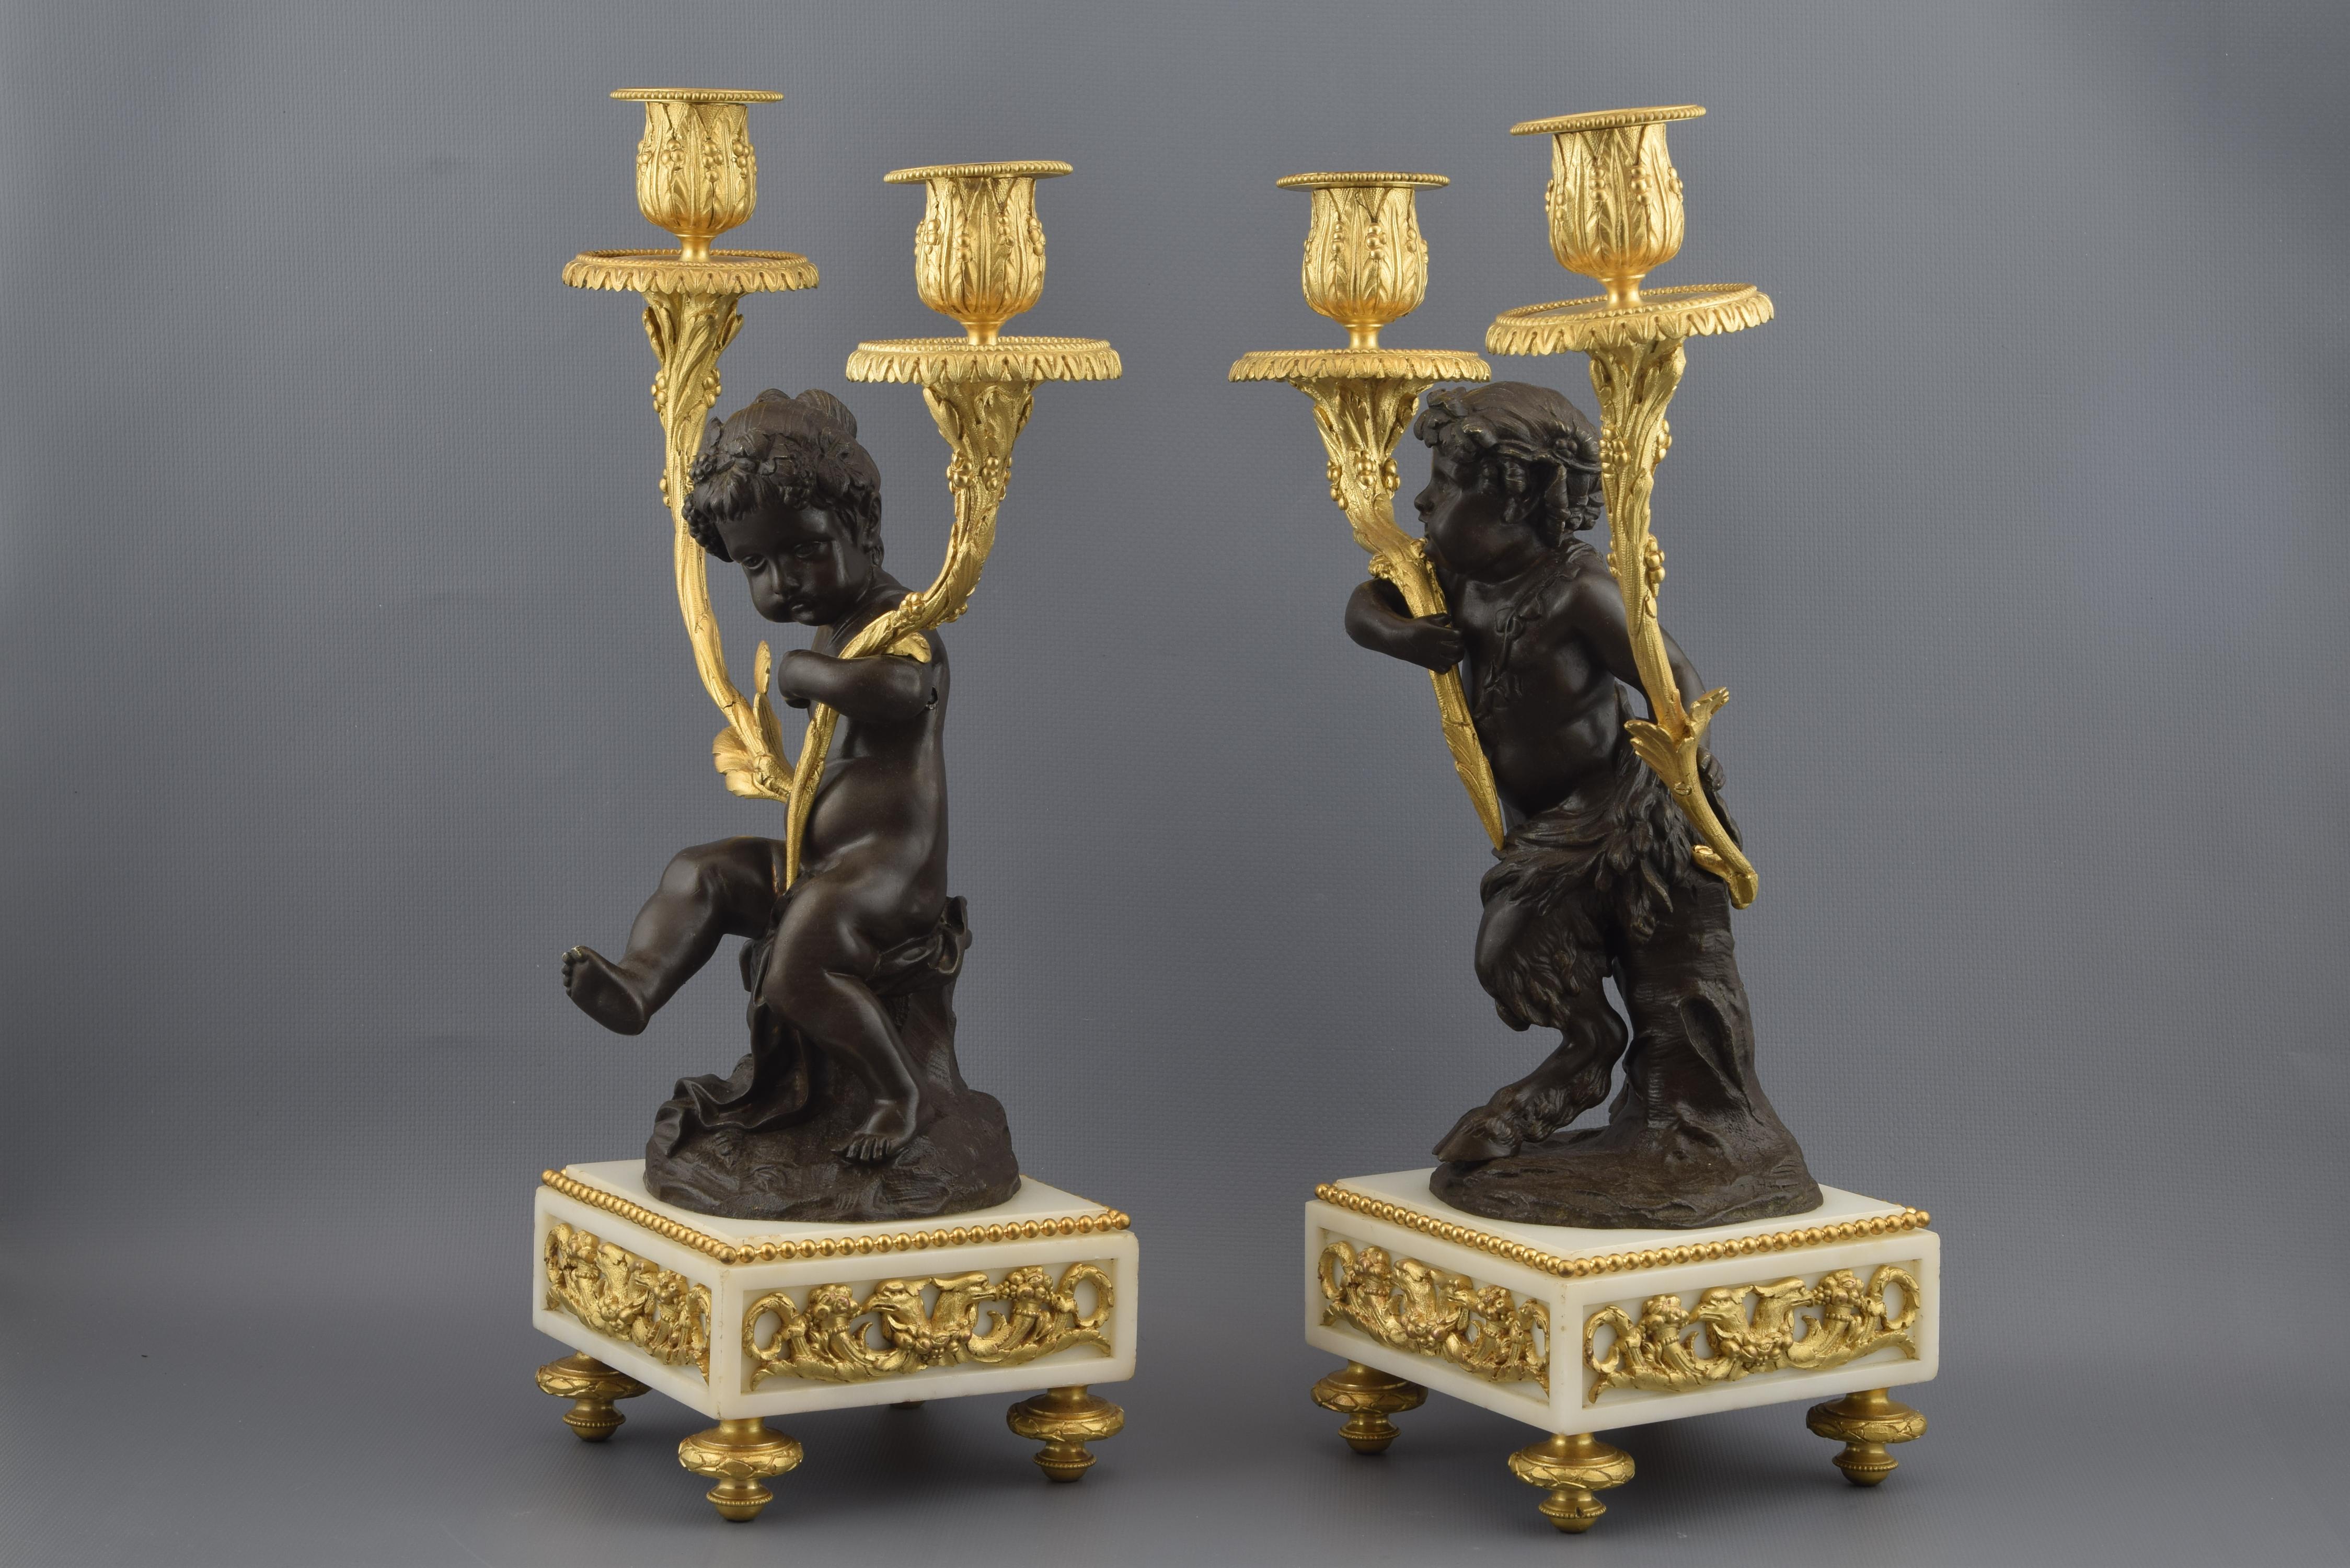 Ormolu and patinated bronze; marble. After models from Claude Michel 